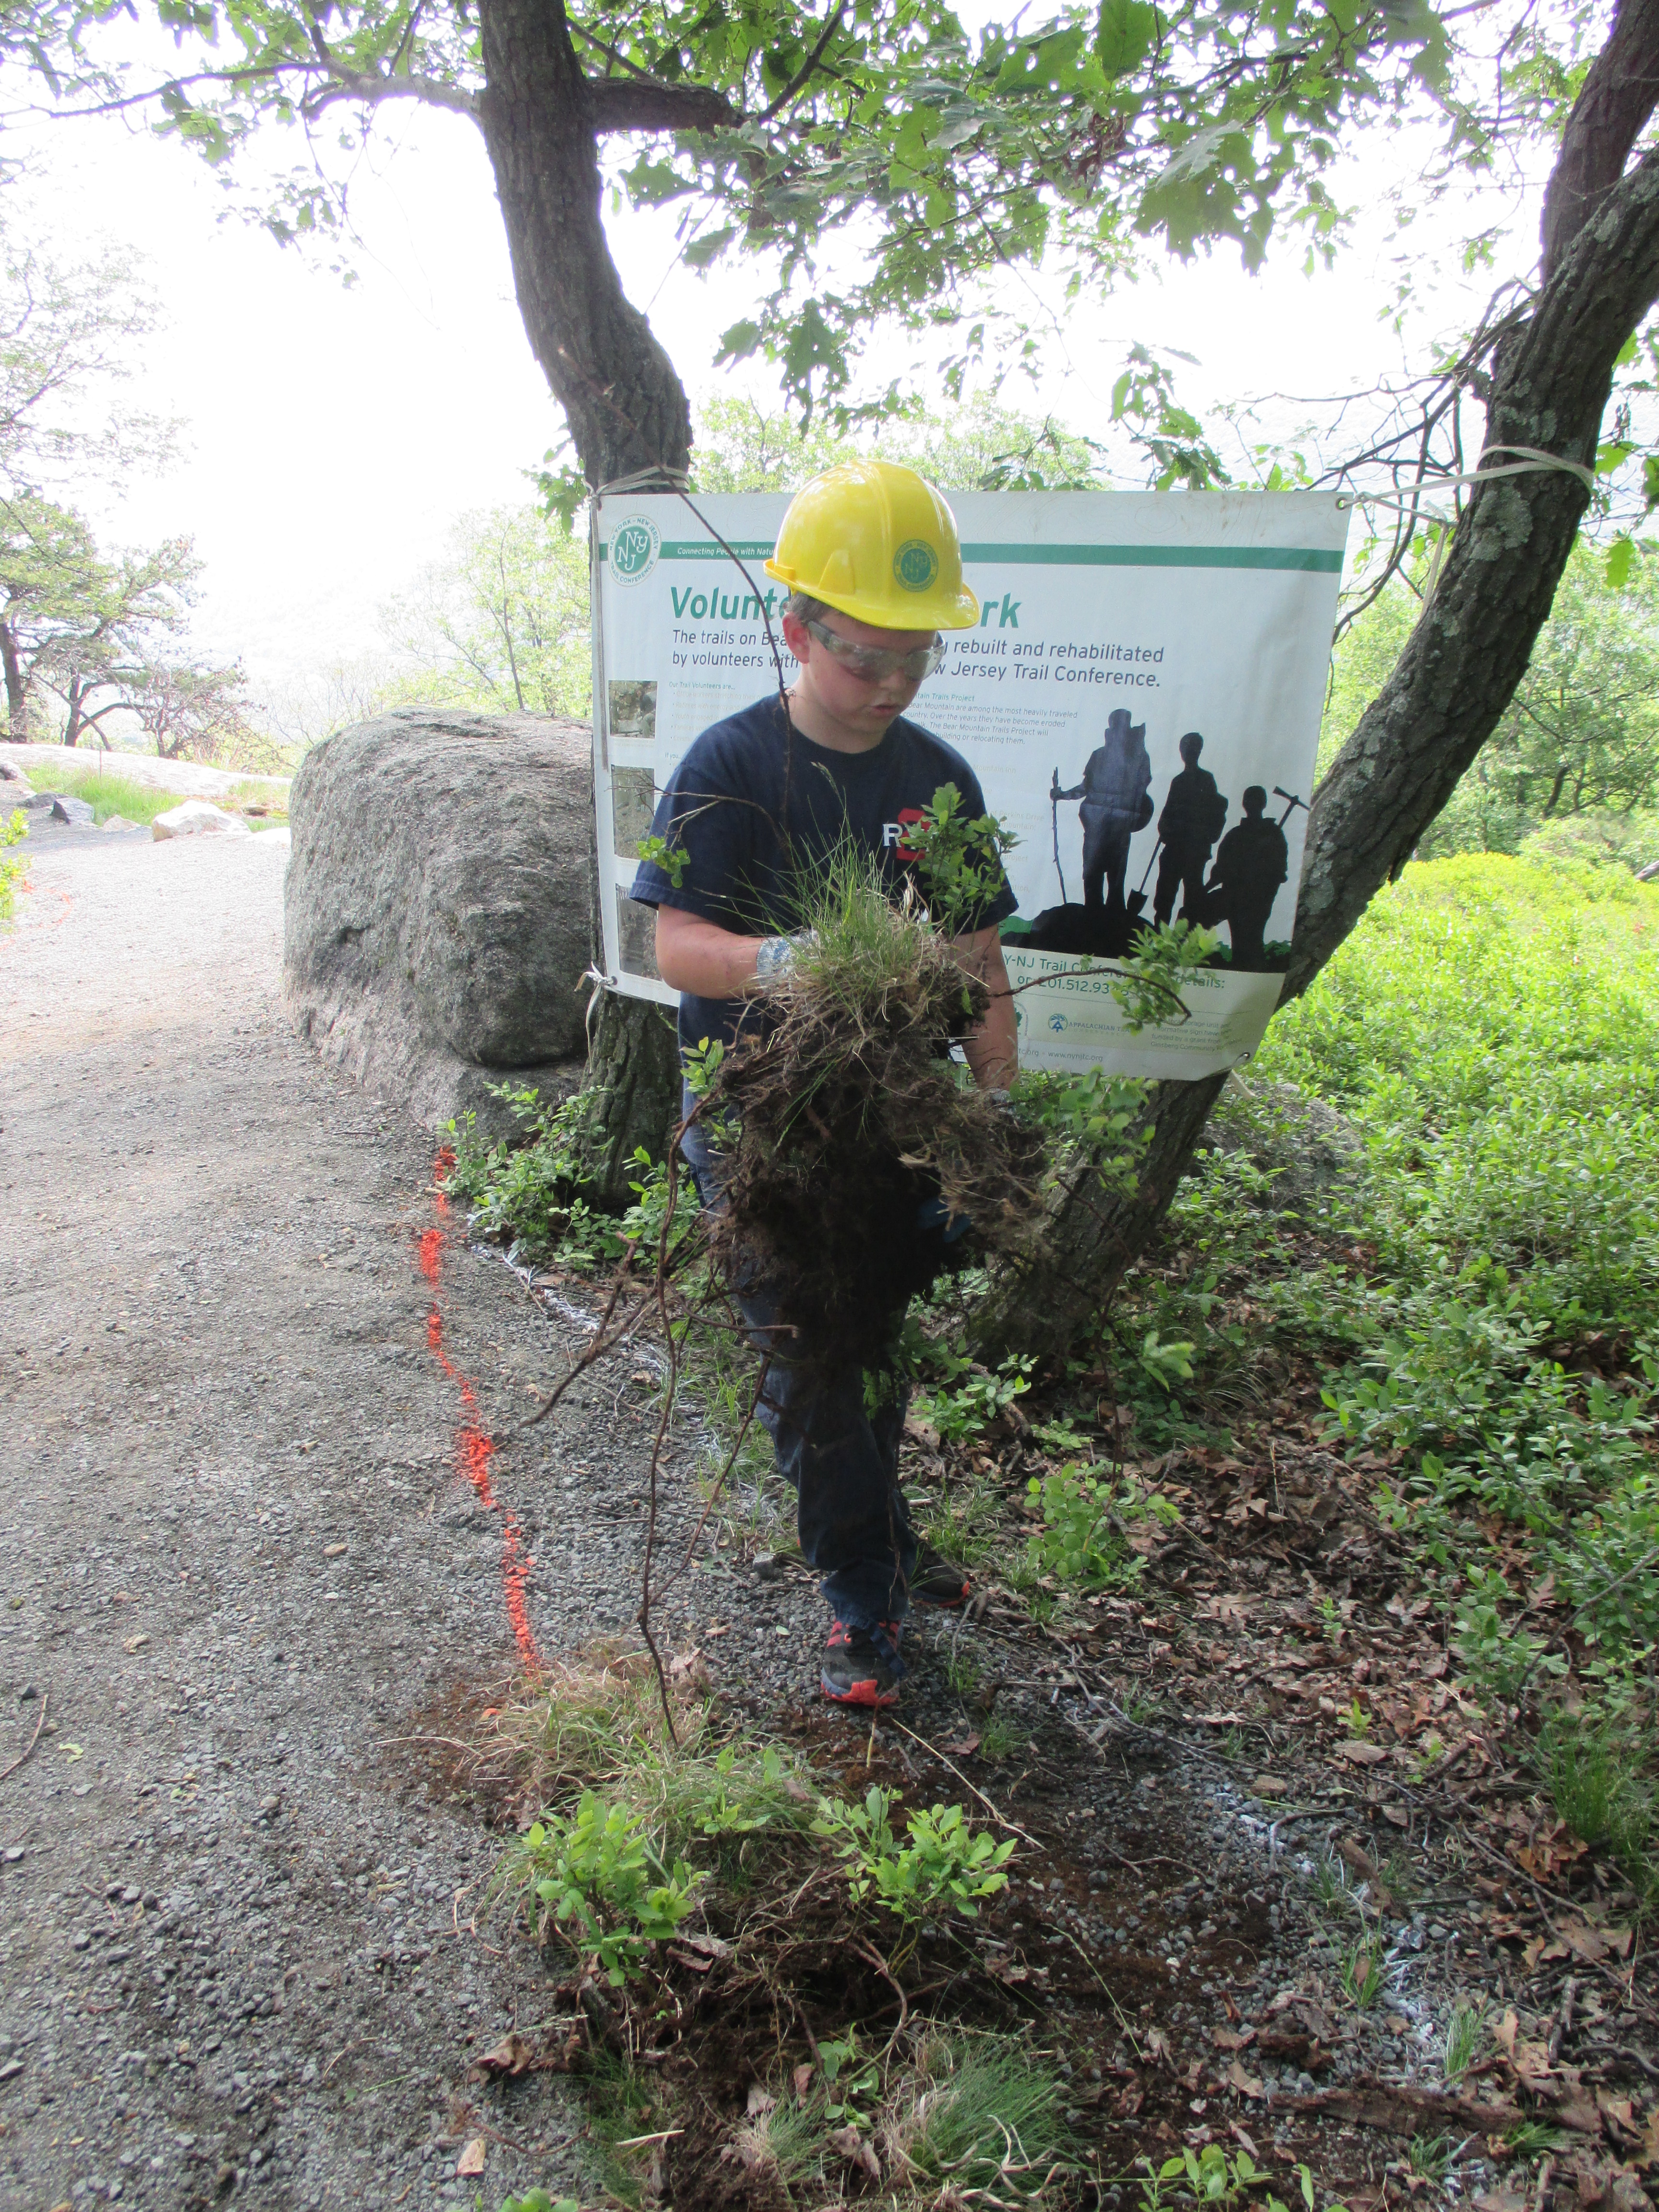 A Boy Scout doing habitat restoration on the Appalachian Trail in Bear Mt. State Park, NY.